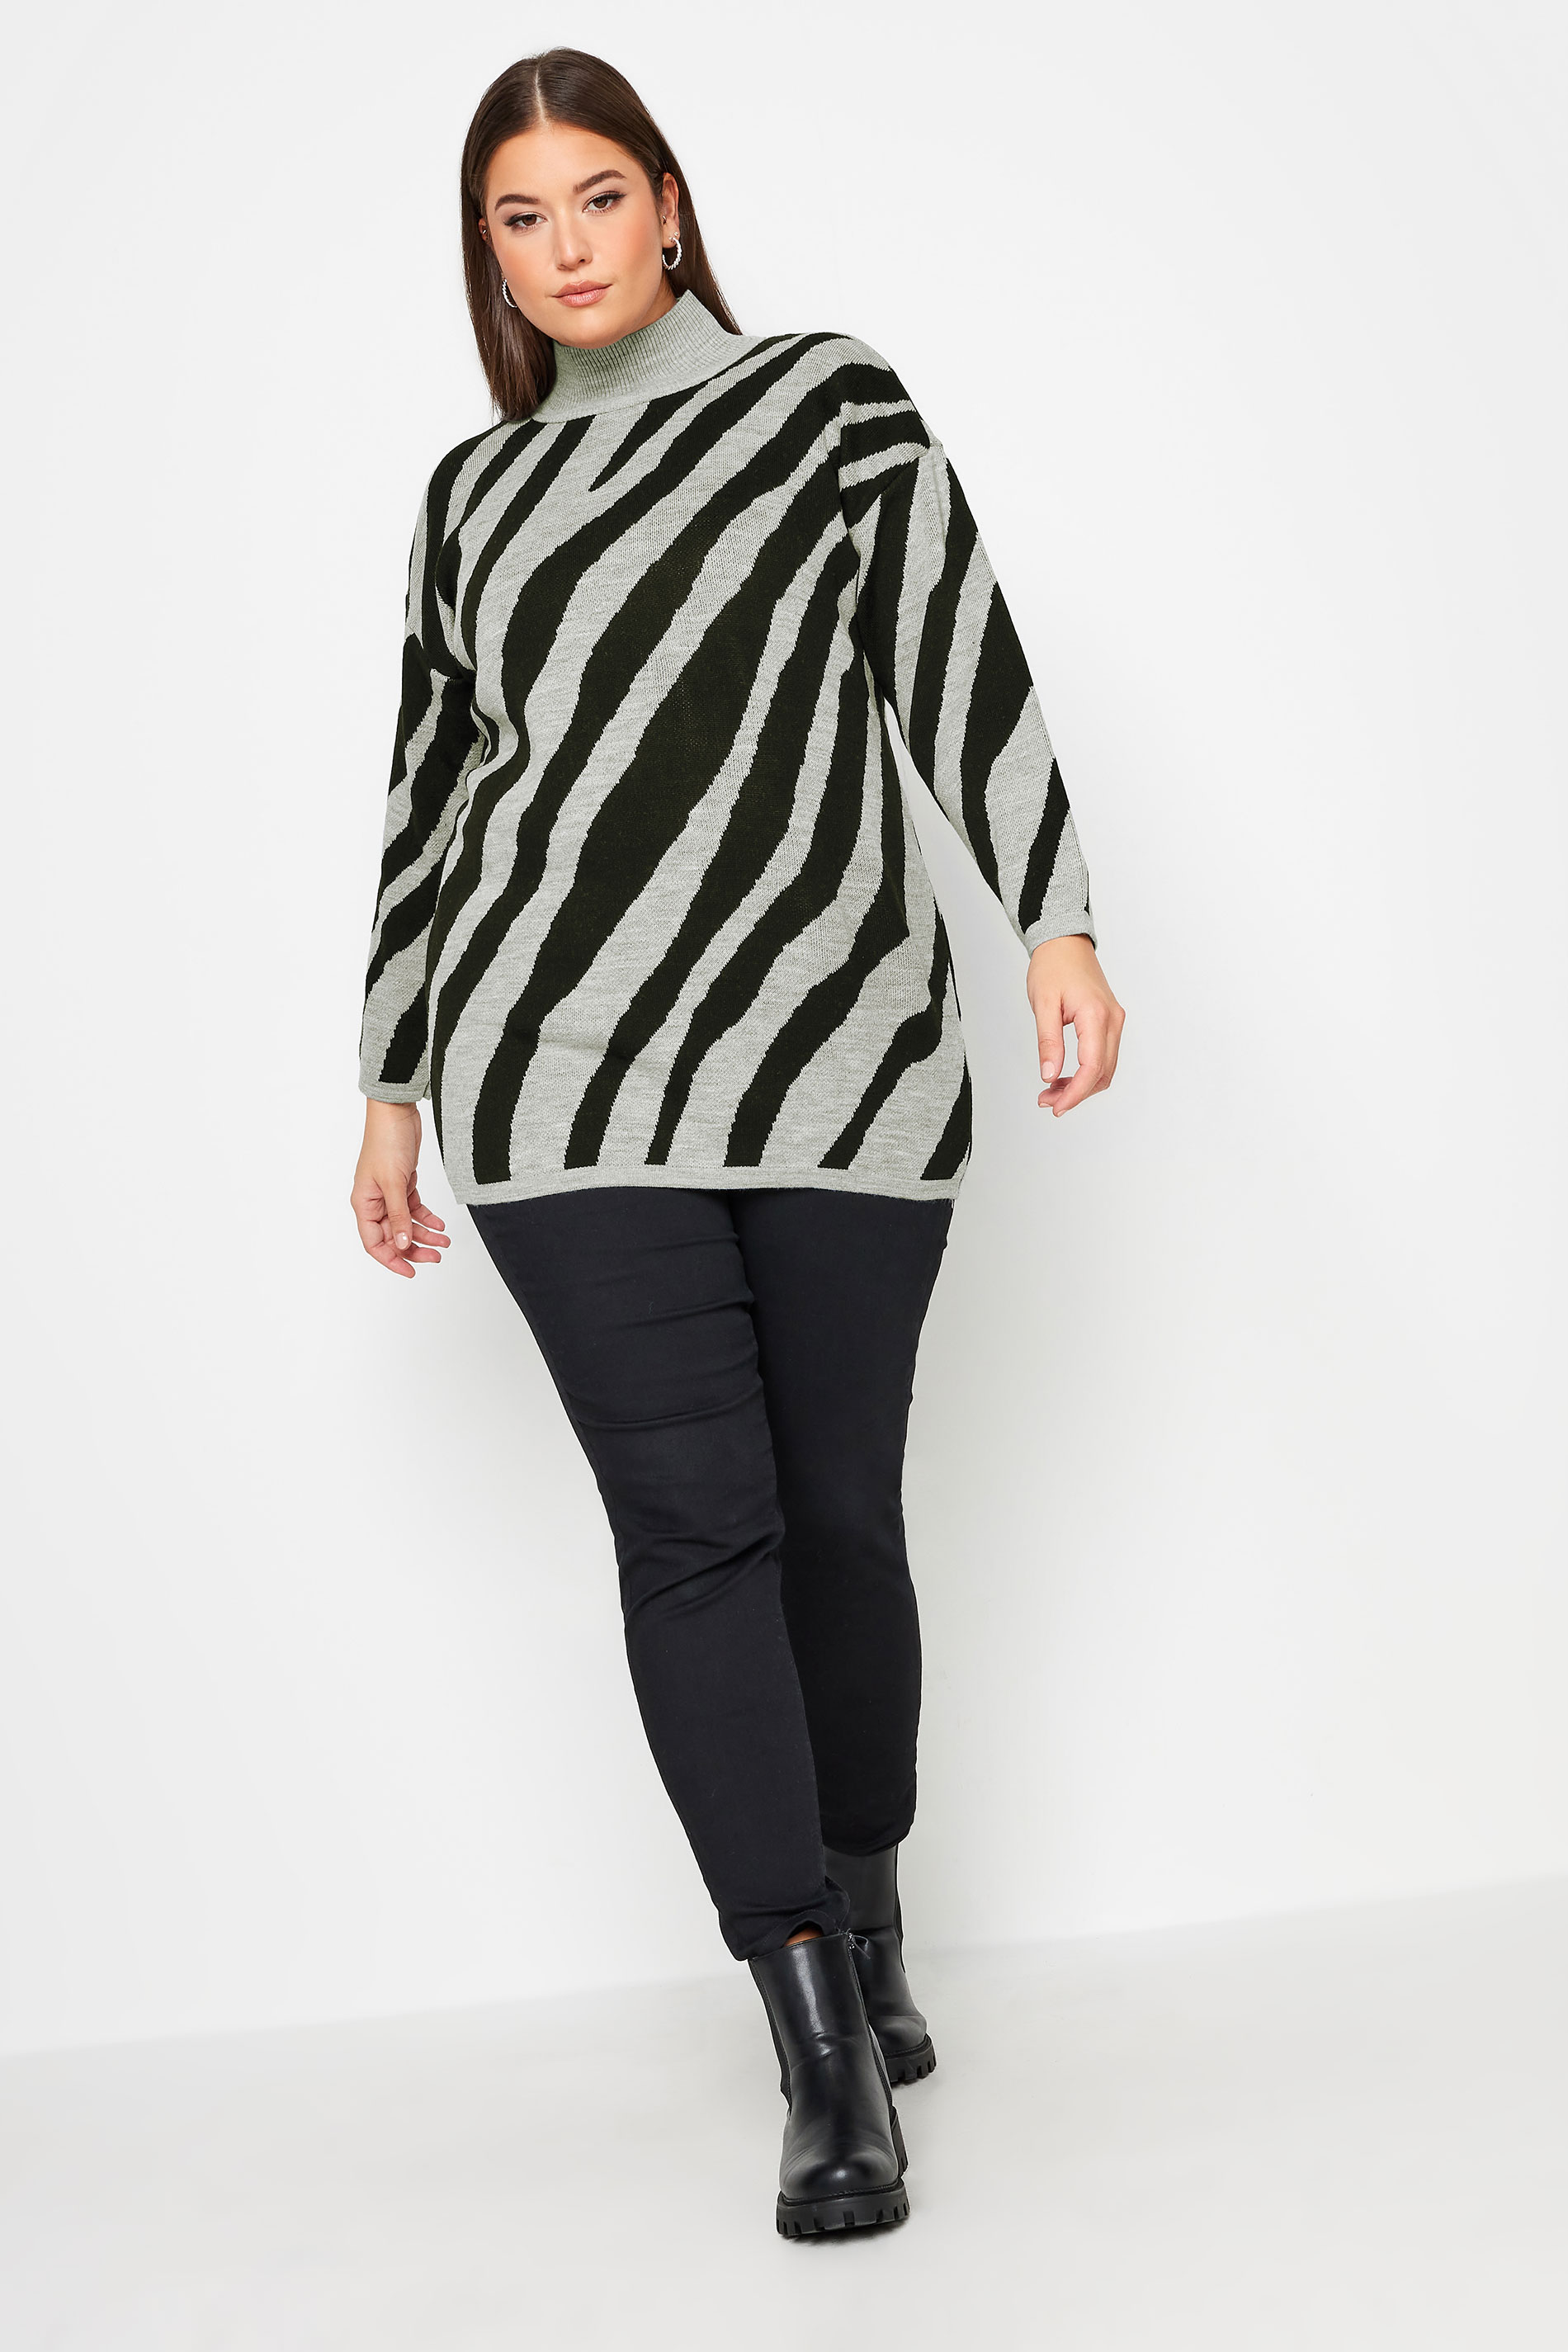 YOURS Plus Size Grey Zebra Print Turtle Neck Jumper | Yours Clothing 2